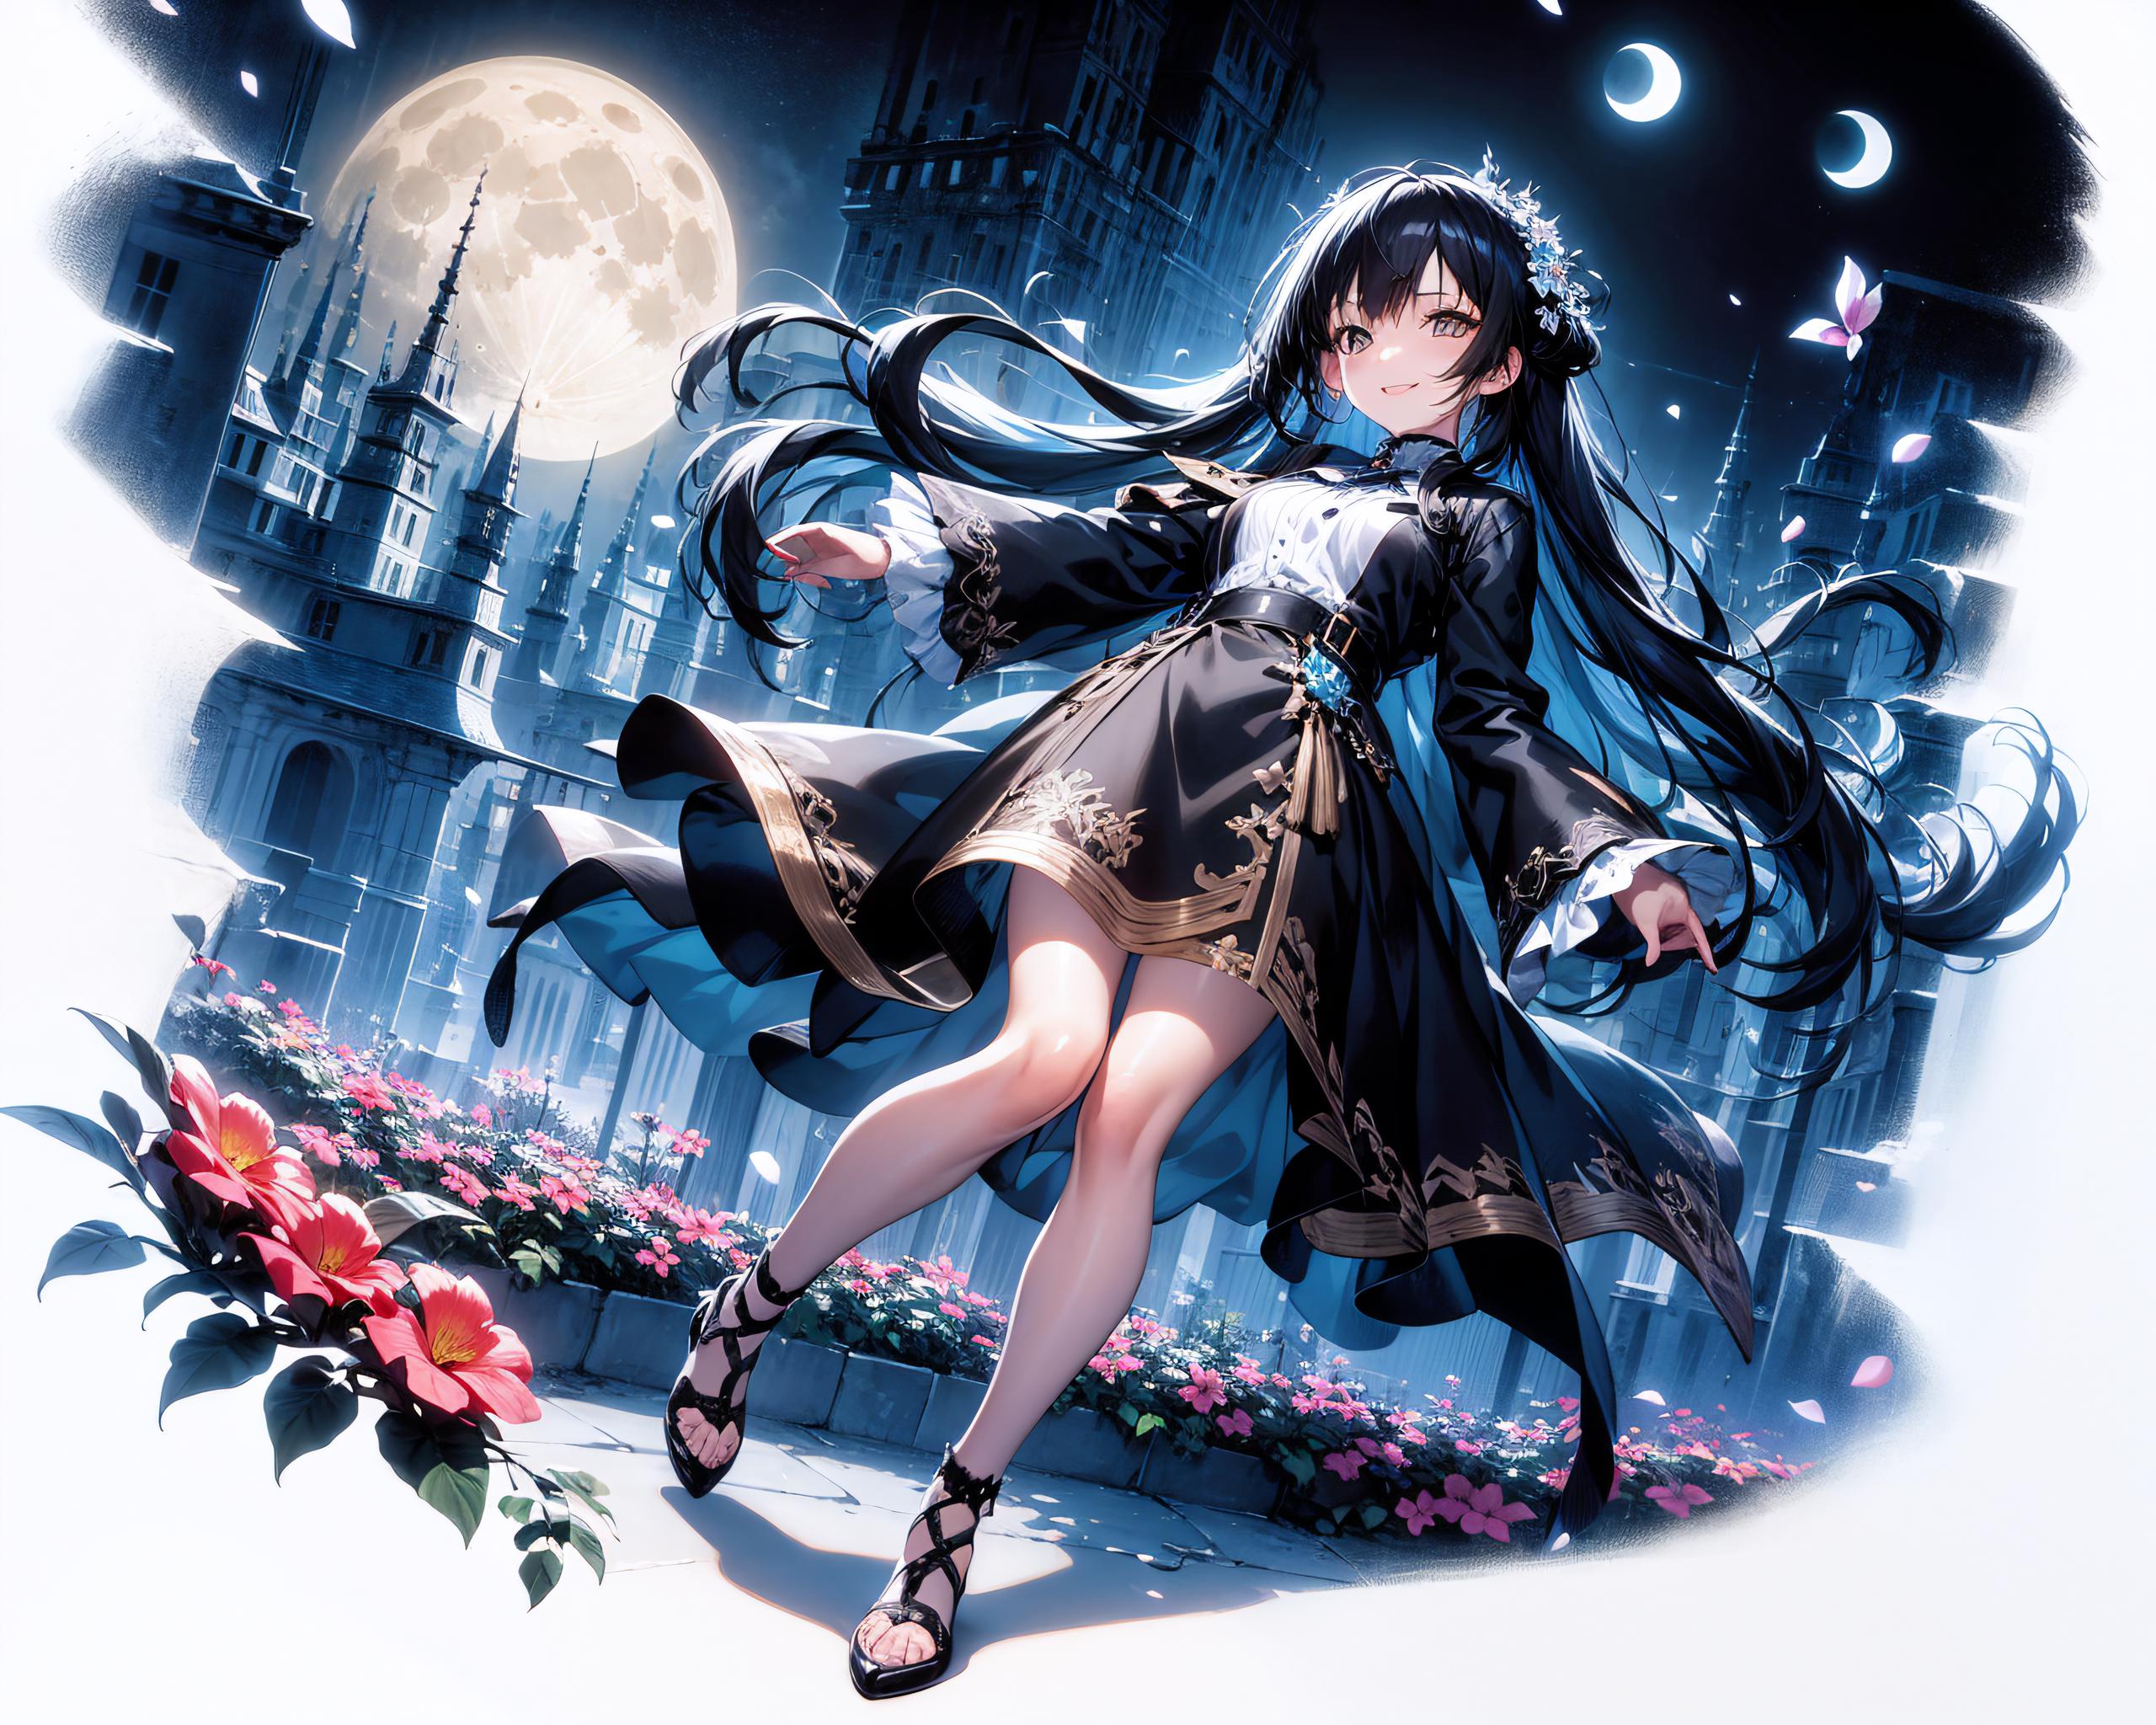 Anime girl with a blue dress and black hair looking up at the moon.